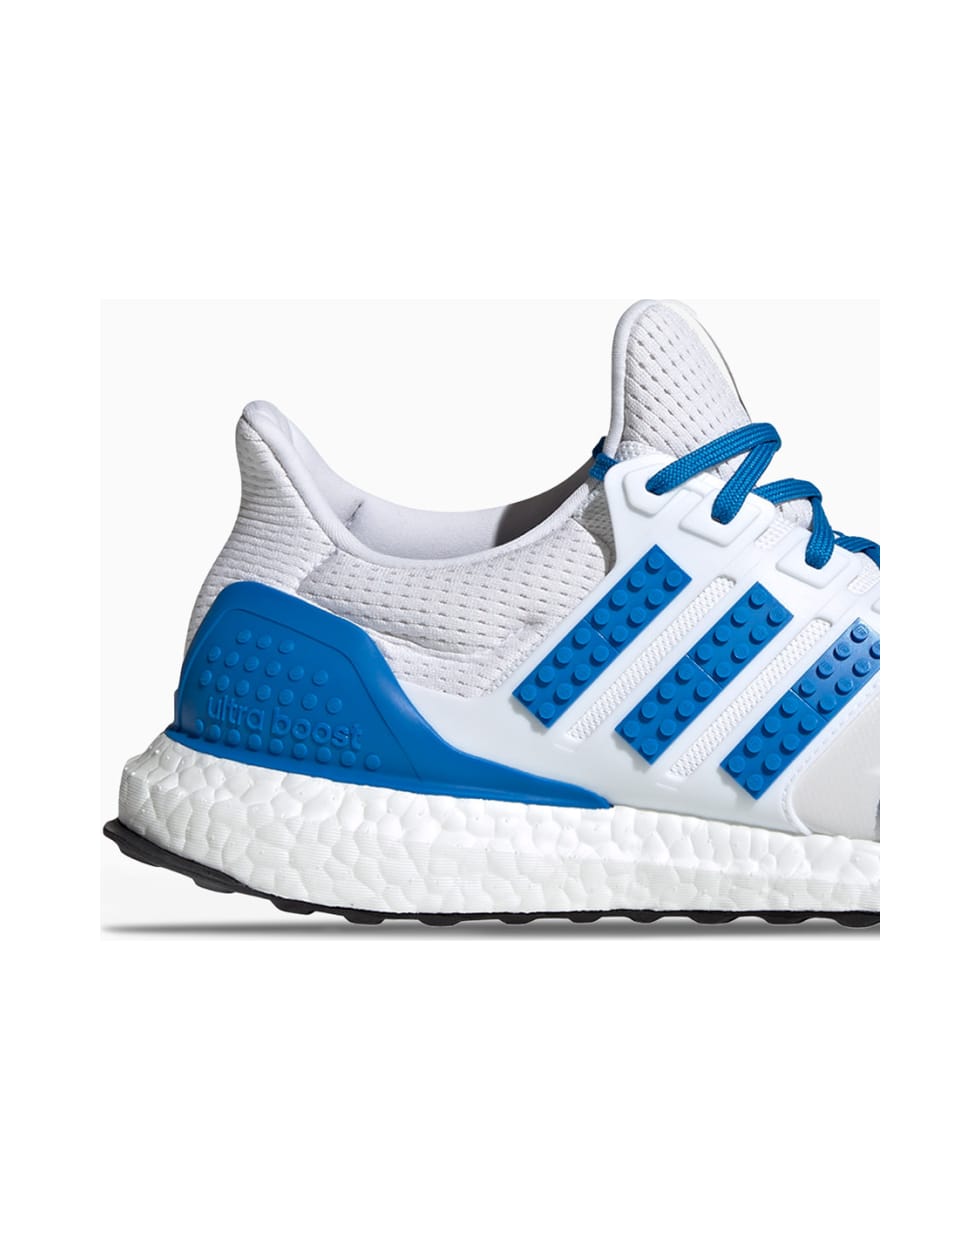 Adidas Ultraboost Dna X Lego H67952 Sneakers - WHITE